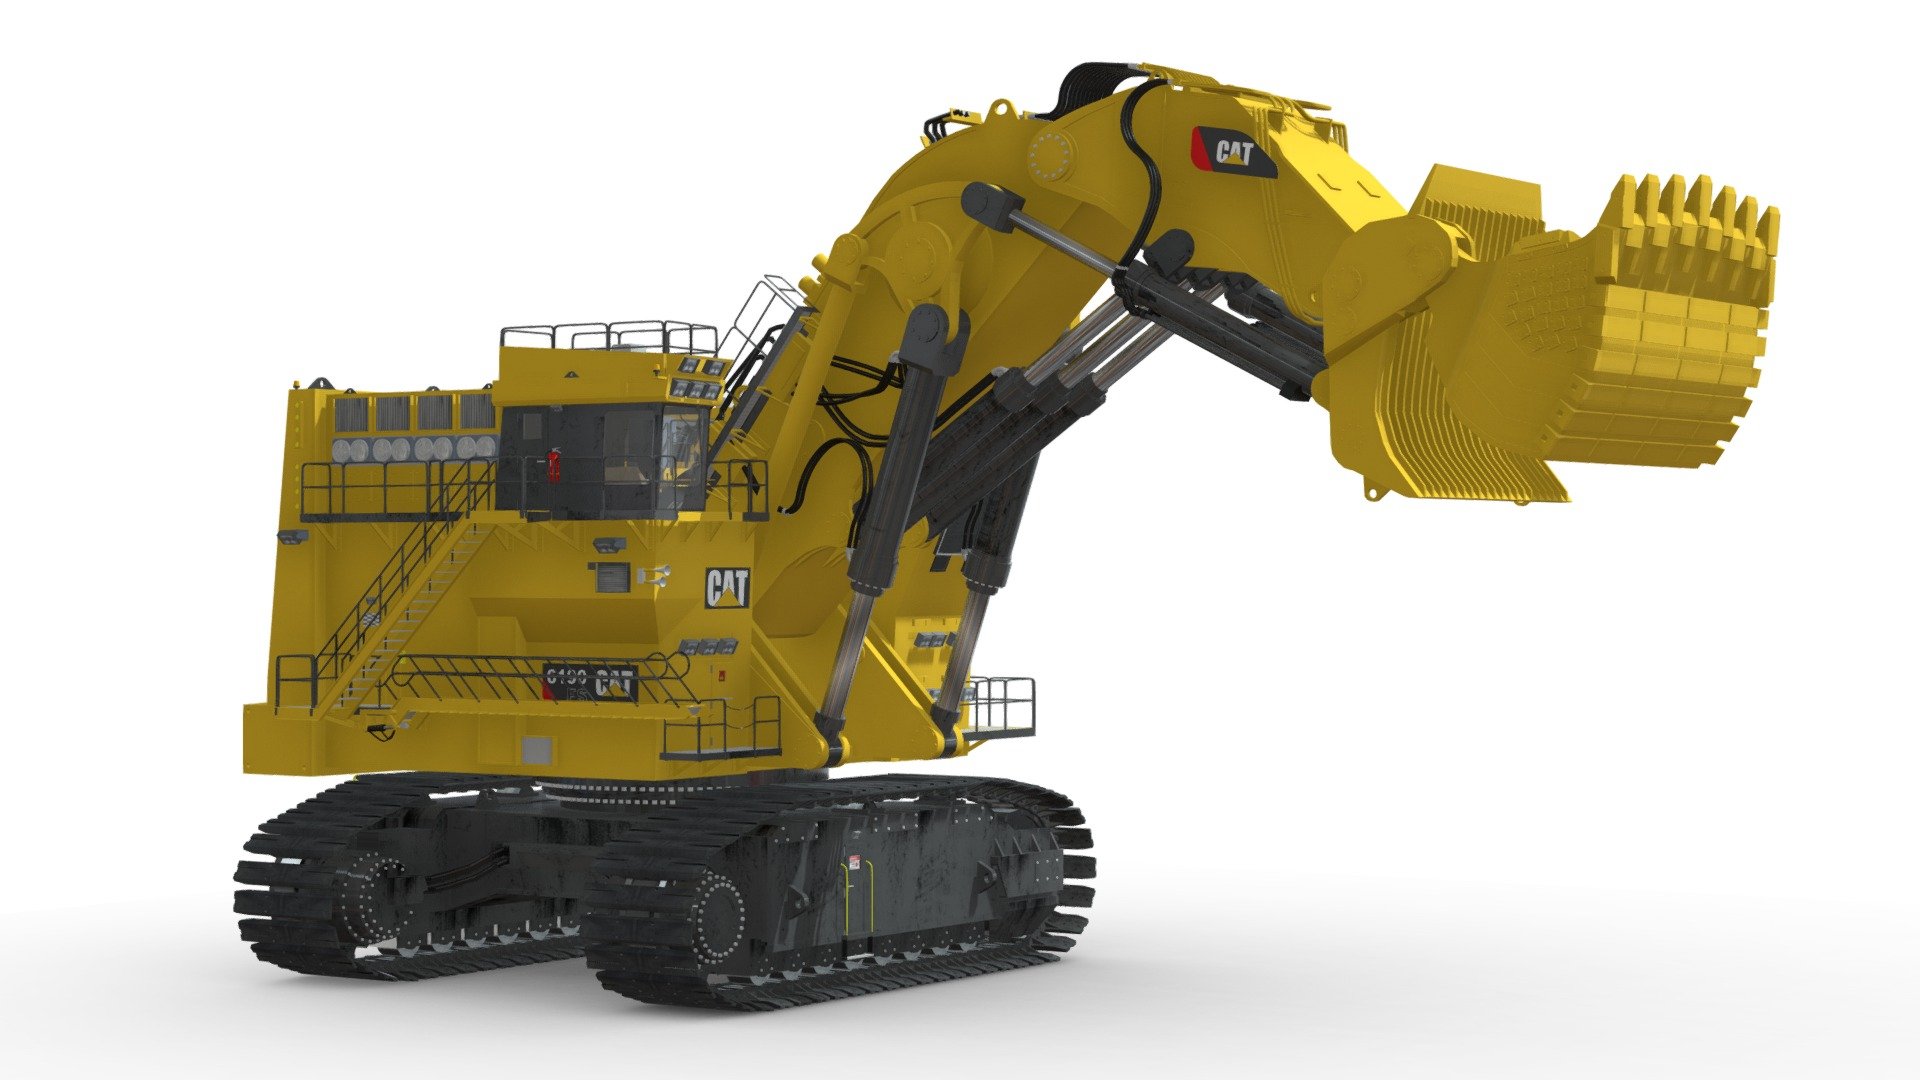 The CAT 6190 Shovel Excavator is a large-scale heavy equipment designed and manufactured by Caterpillar, a renowned leader in the construction and mining industry. This robust machine is engineered for high-performance digging, loading, and earthmoving tasks. With its impressive power and precision, the CAT 6190 is a crucial asset for large-scale excavation projects. Its advanced hydraulic systems and durable construction make it suitable for a wide range of demanding applications. Whether it's mining operations, quarrying, or major construction projects, the CAT 6190 Shovel Excavator stands as a reliable workhorse 3d model